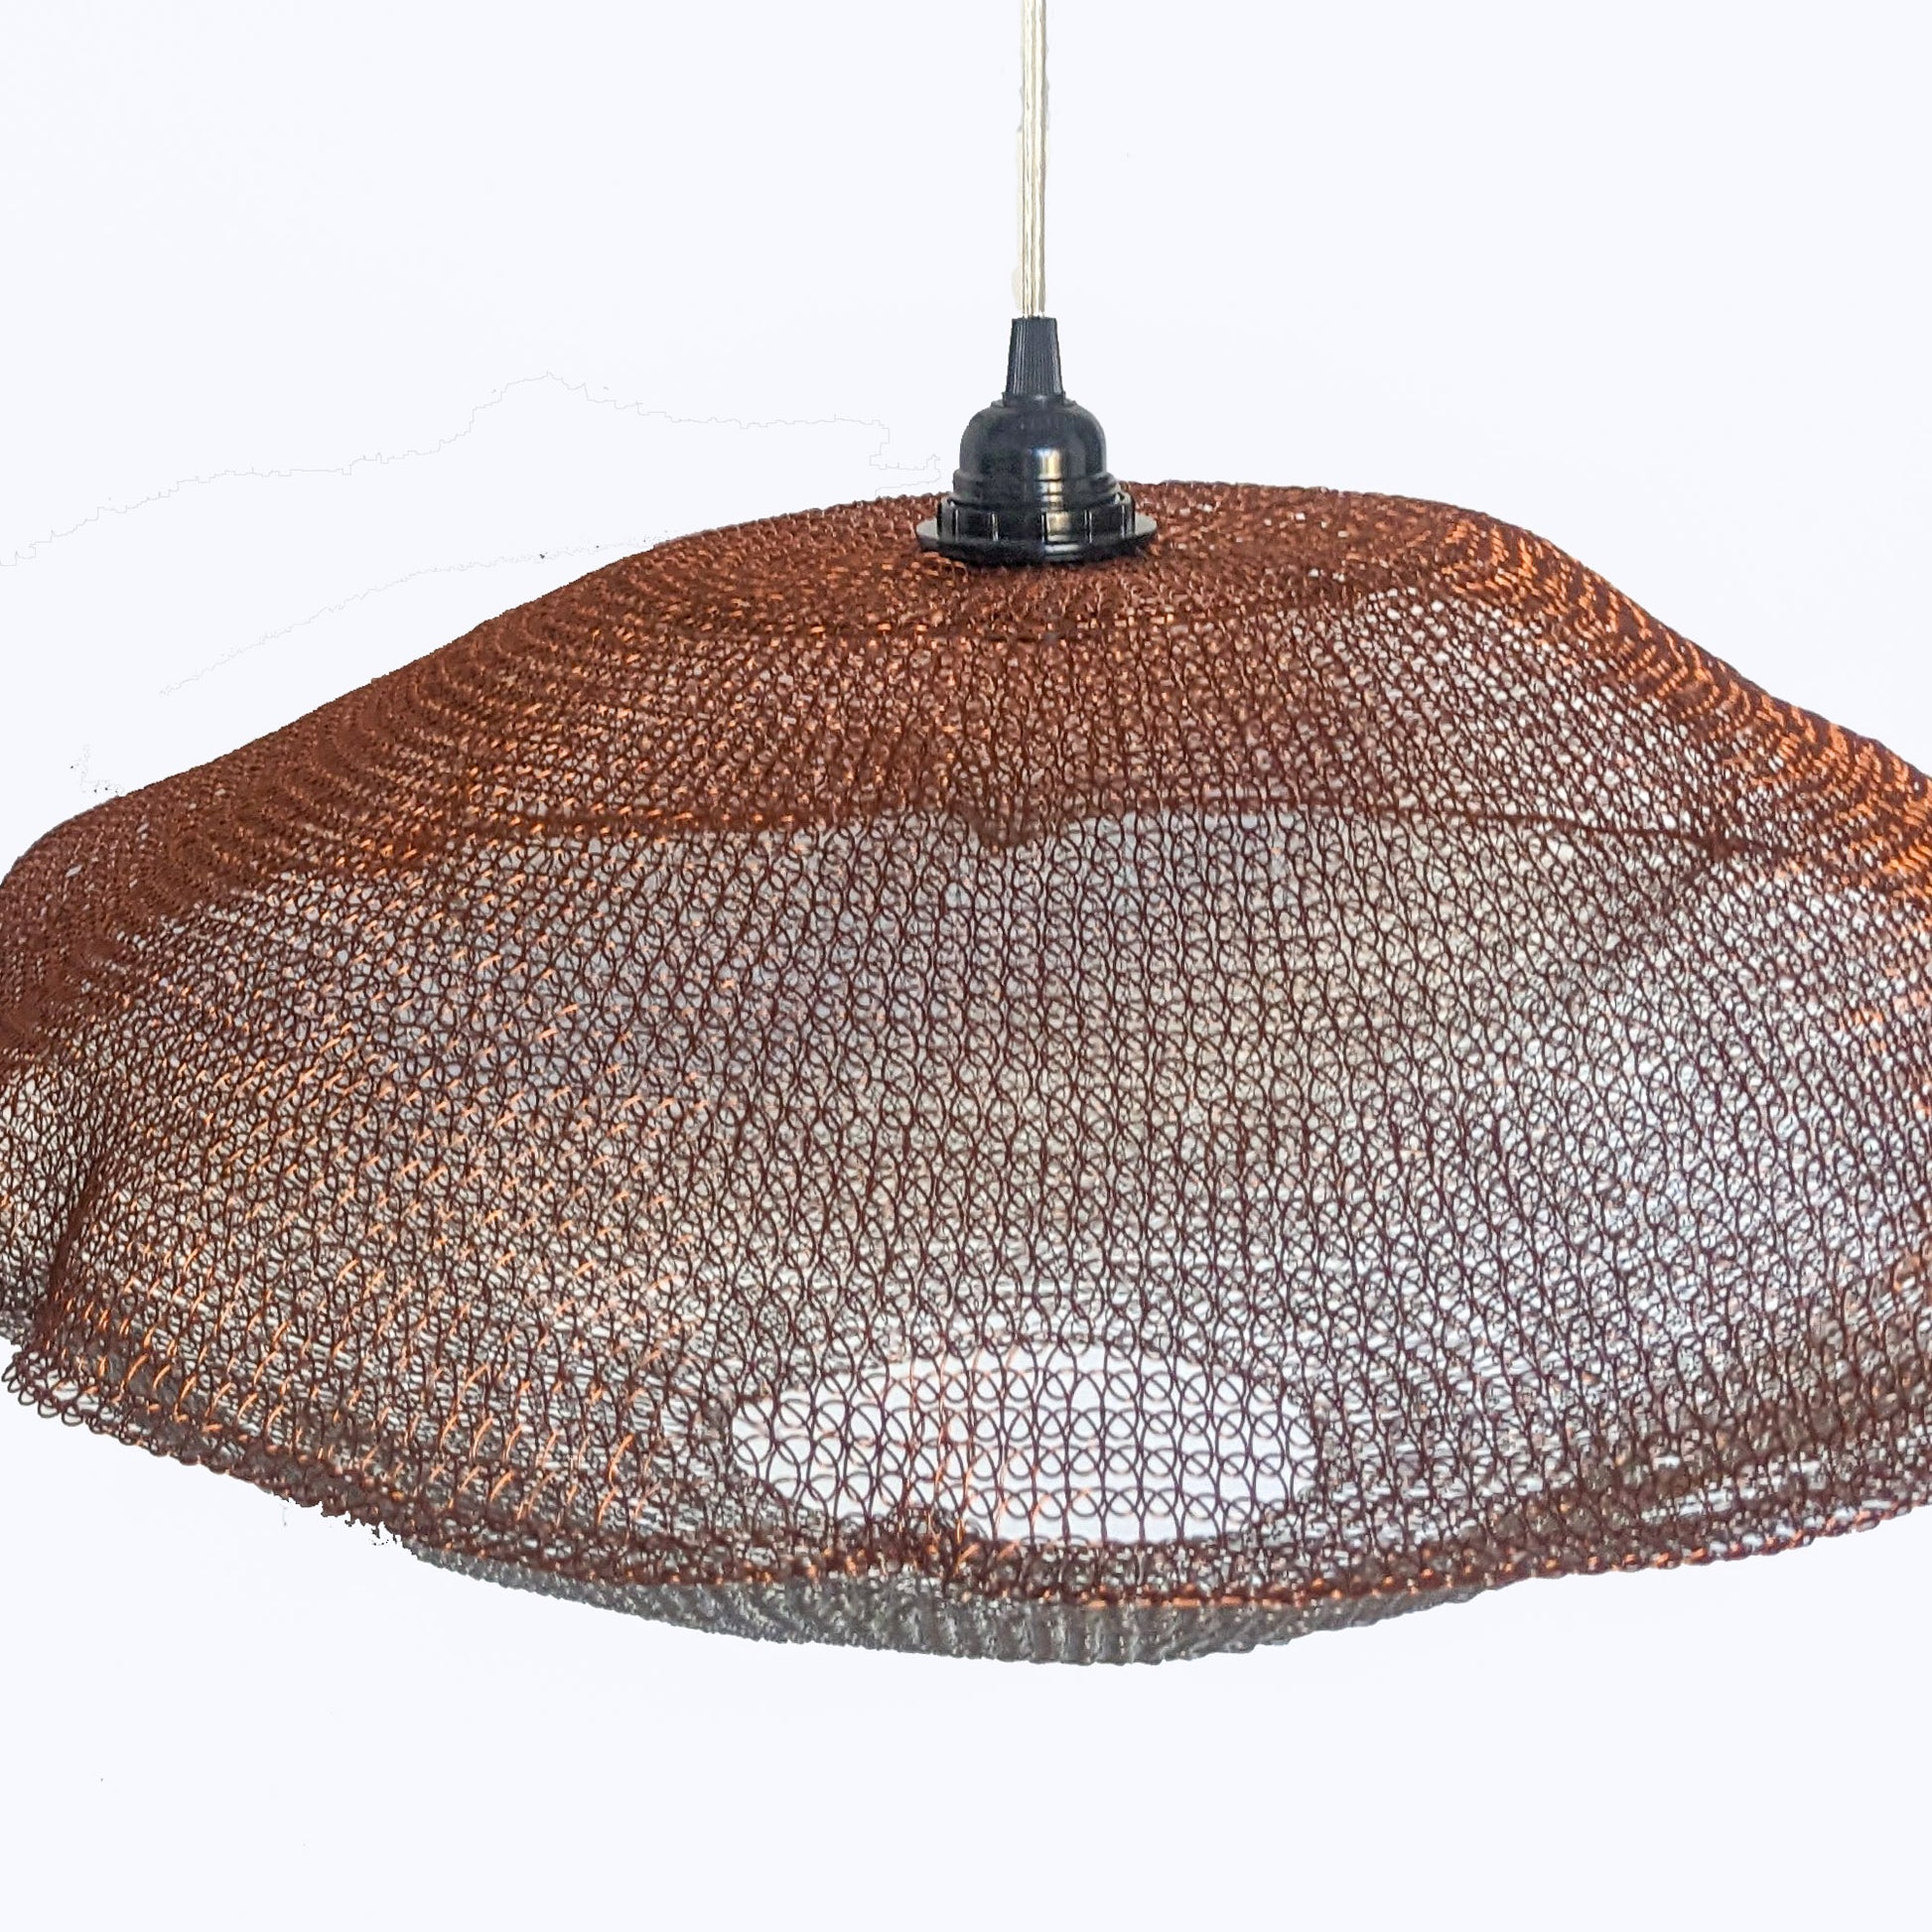 Wire Mesh ceiling light Bali